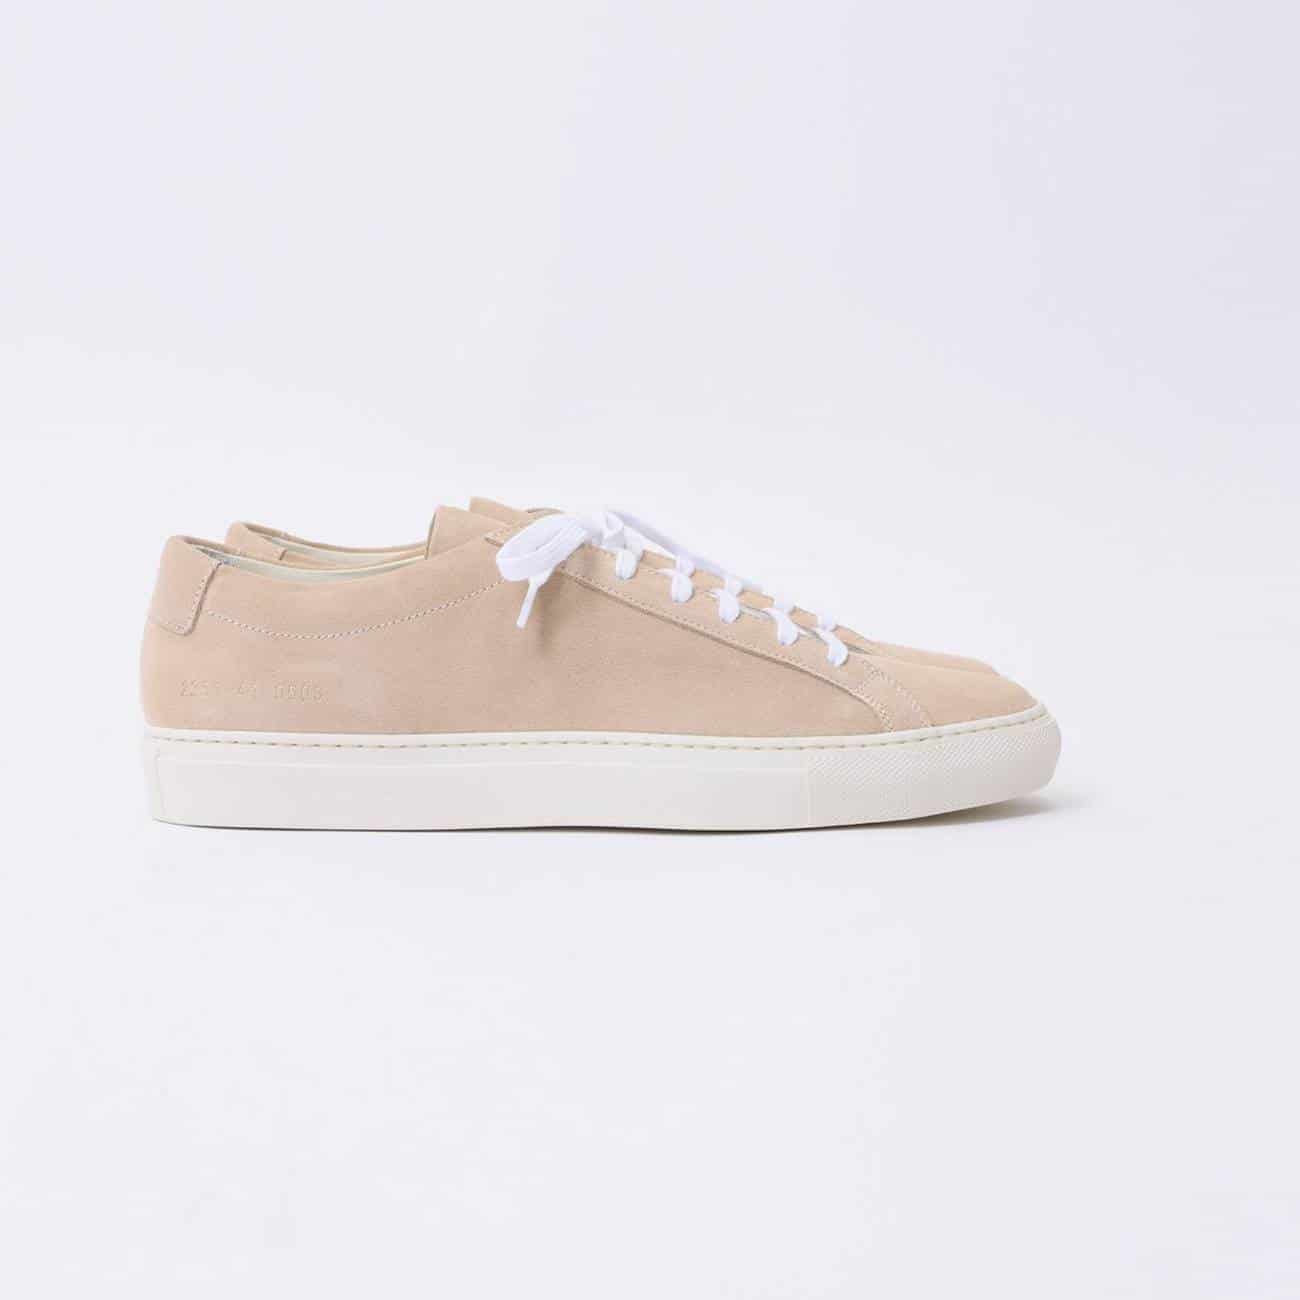 Les chaussures Common Projects